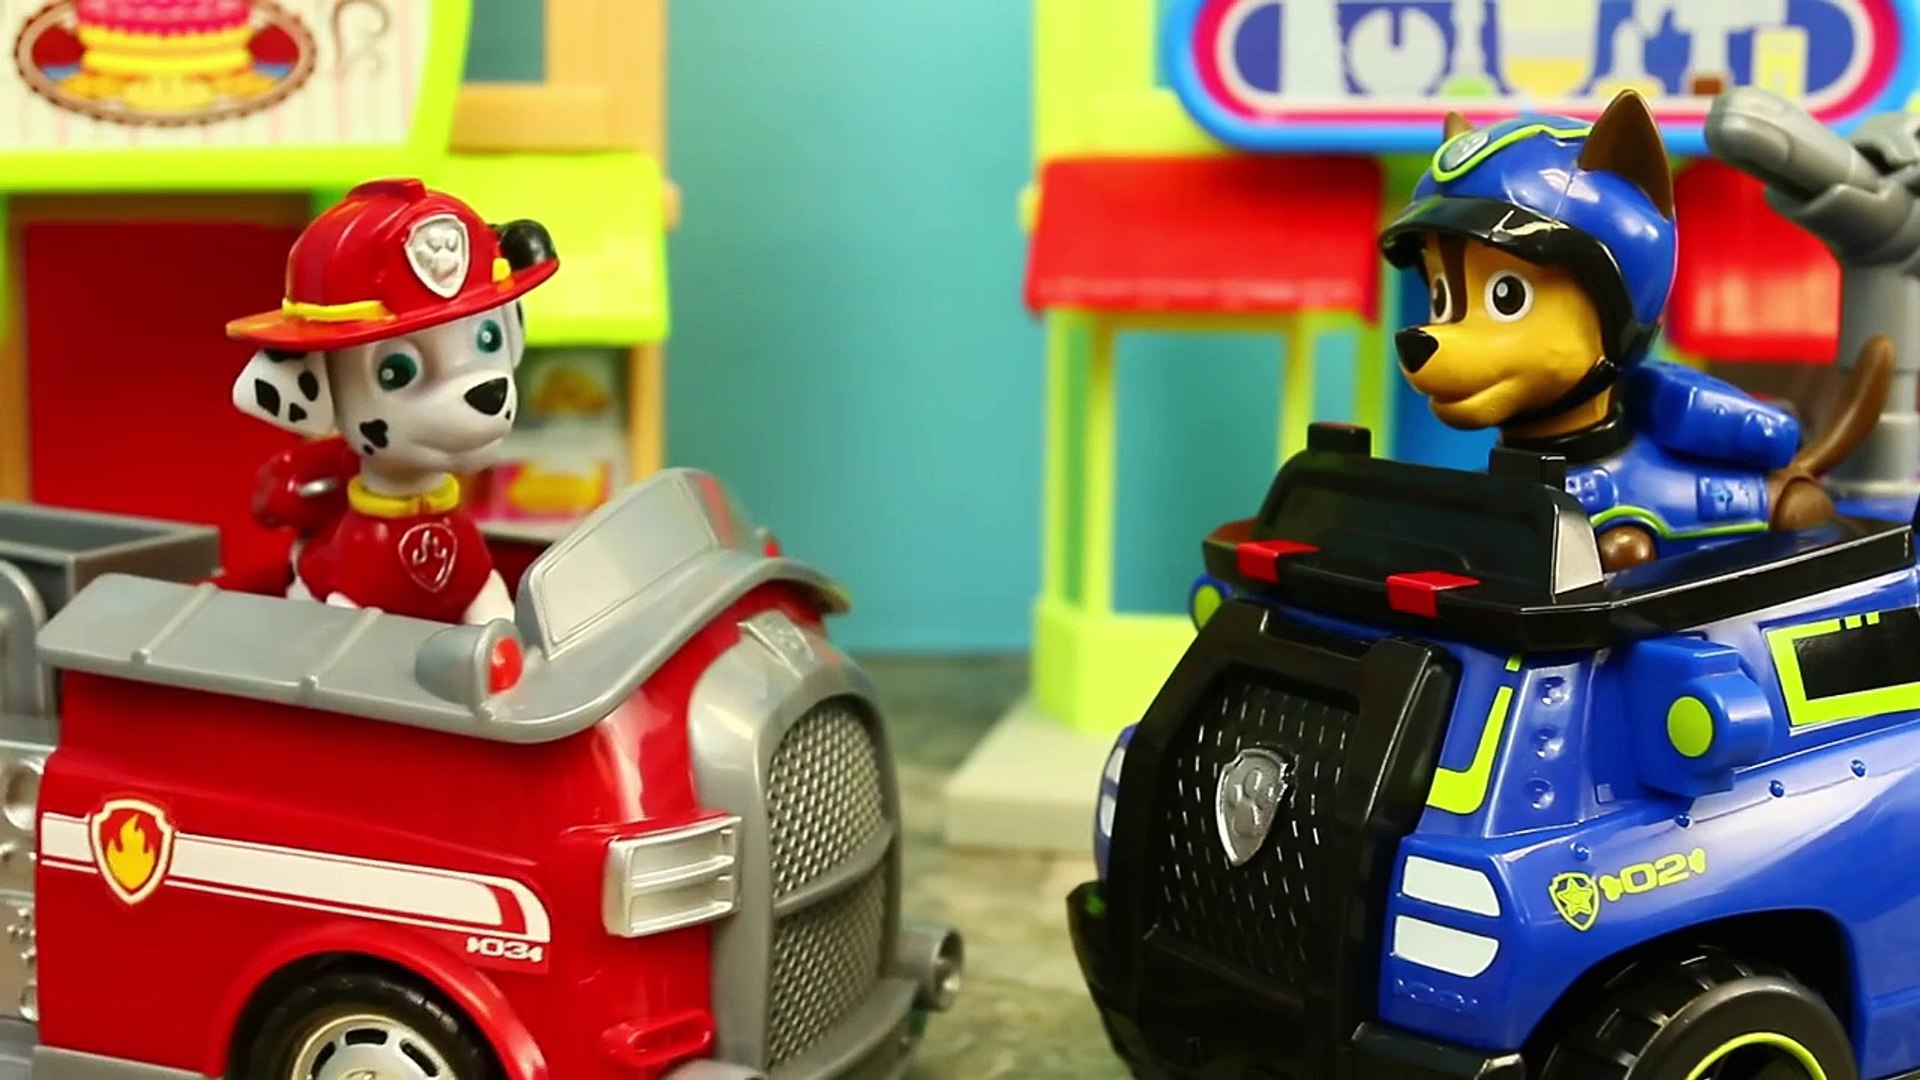 Paw Patrol Marshall Rescued by Duplo Lego Captain America and Spiderman at  Adventure Bay Townset - Dailymotion Video